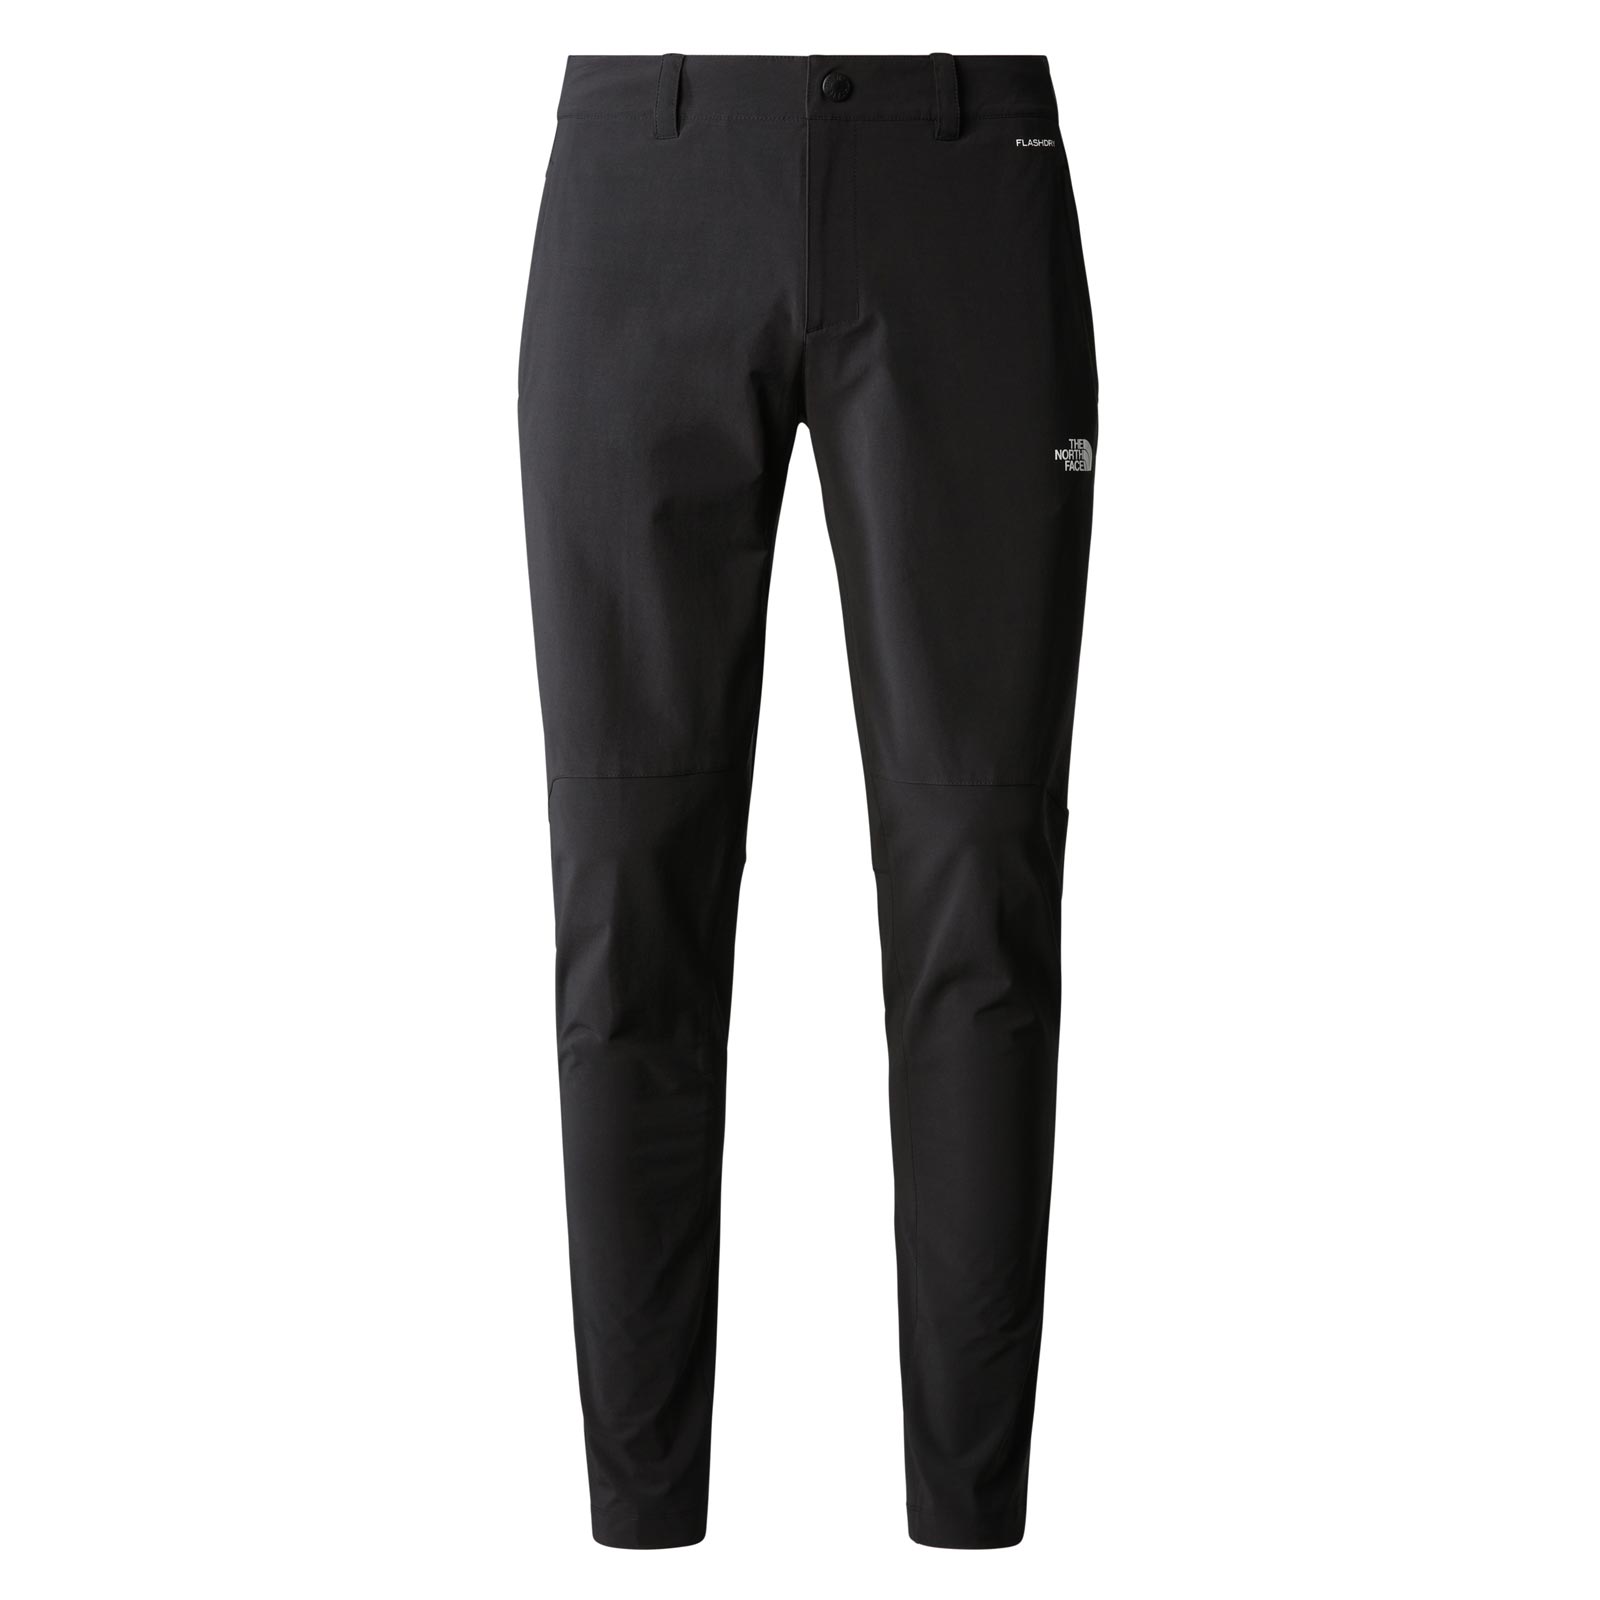 THE NORTH FACE EXTENT III MENS HIKING PANTS  